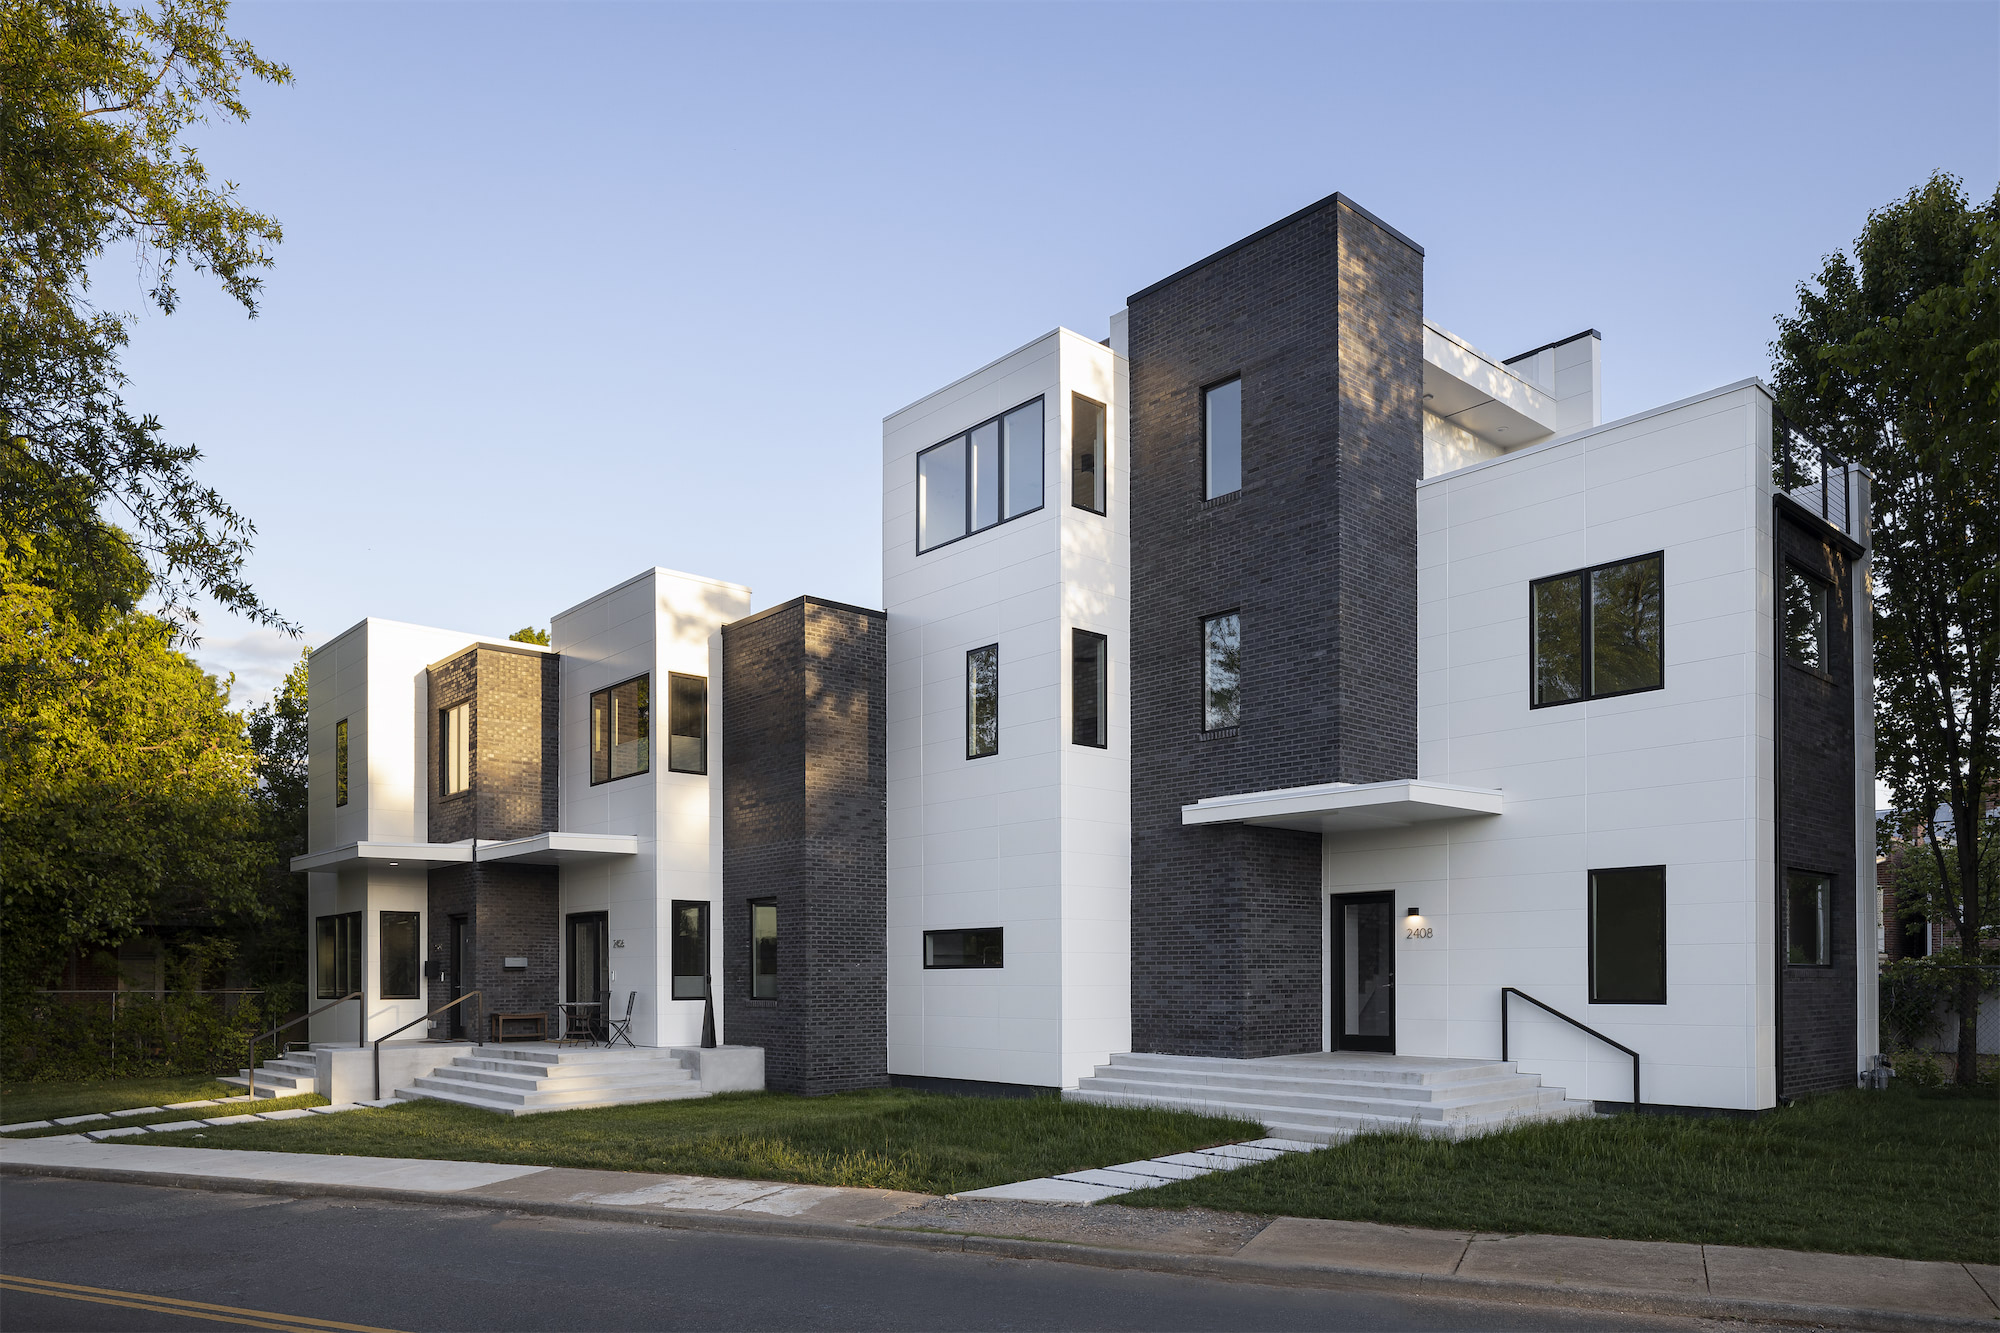 Exterior of Grayland modern townhouses